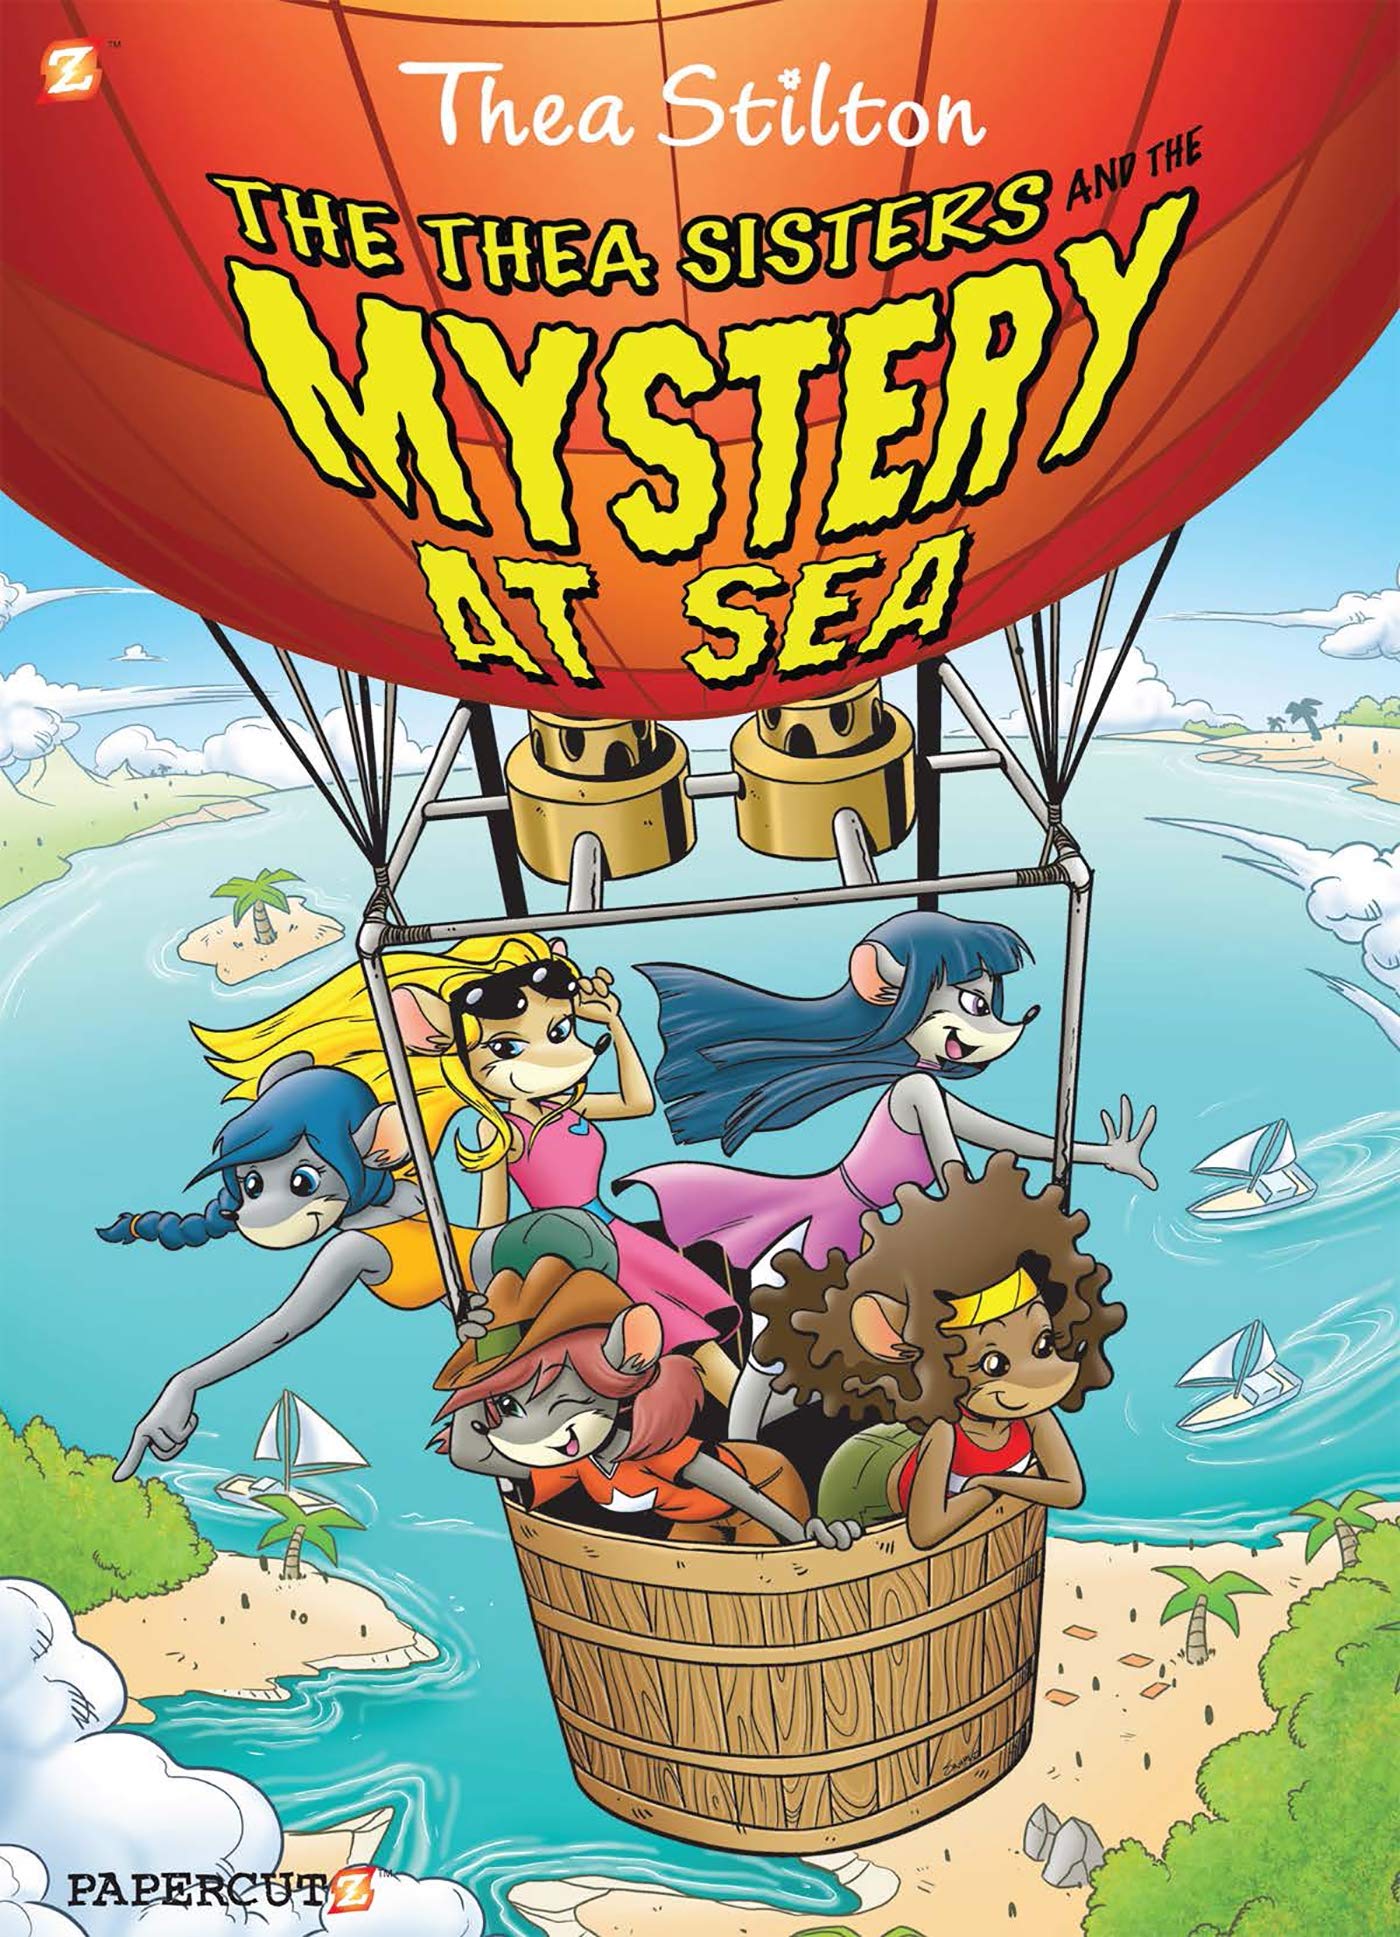 Cover of the book Thea Stilton (Volume 6): The Thea Sisters and the Mystery at Sea. Features the mouse protagonists riding in a hot air balloon above the water.